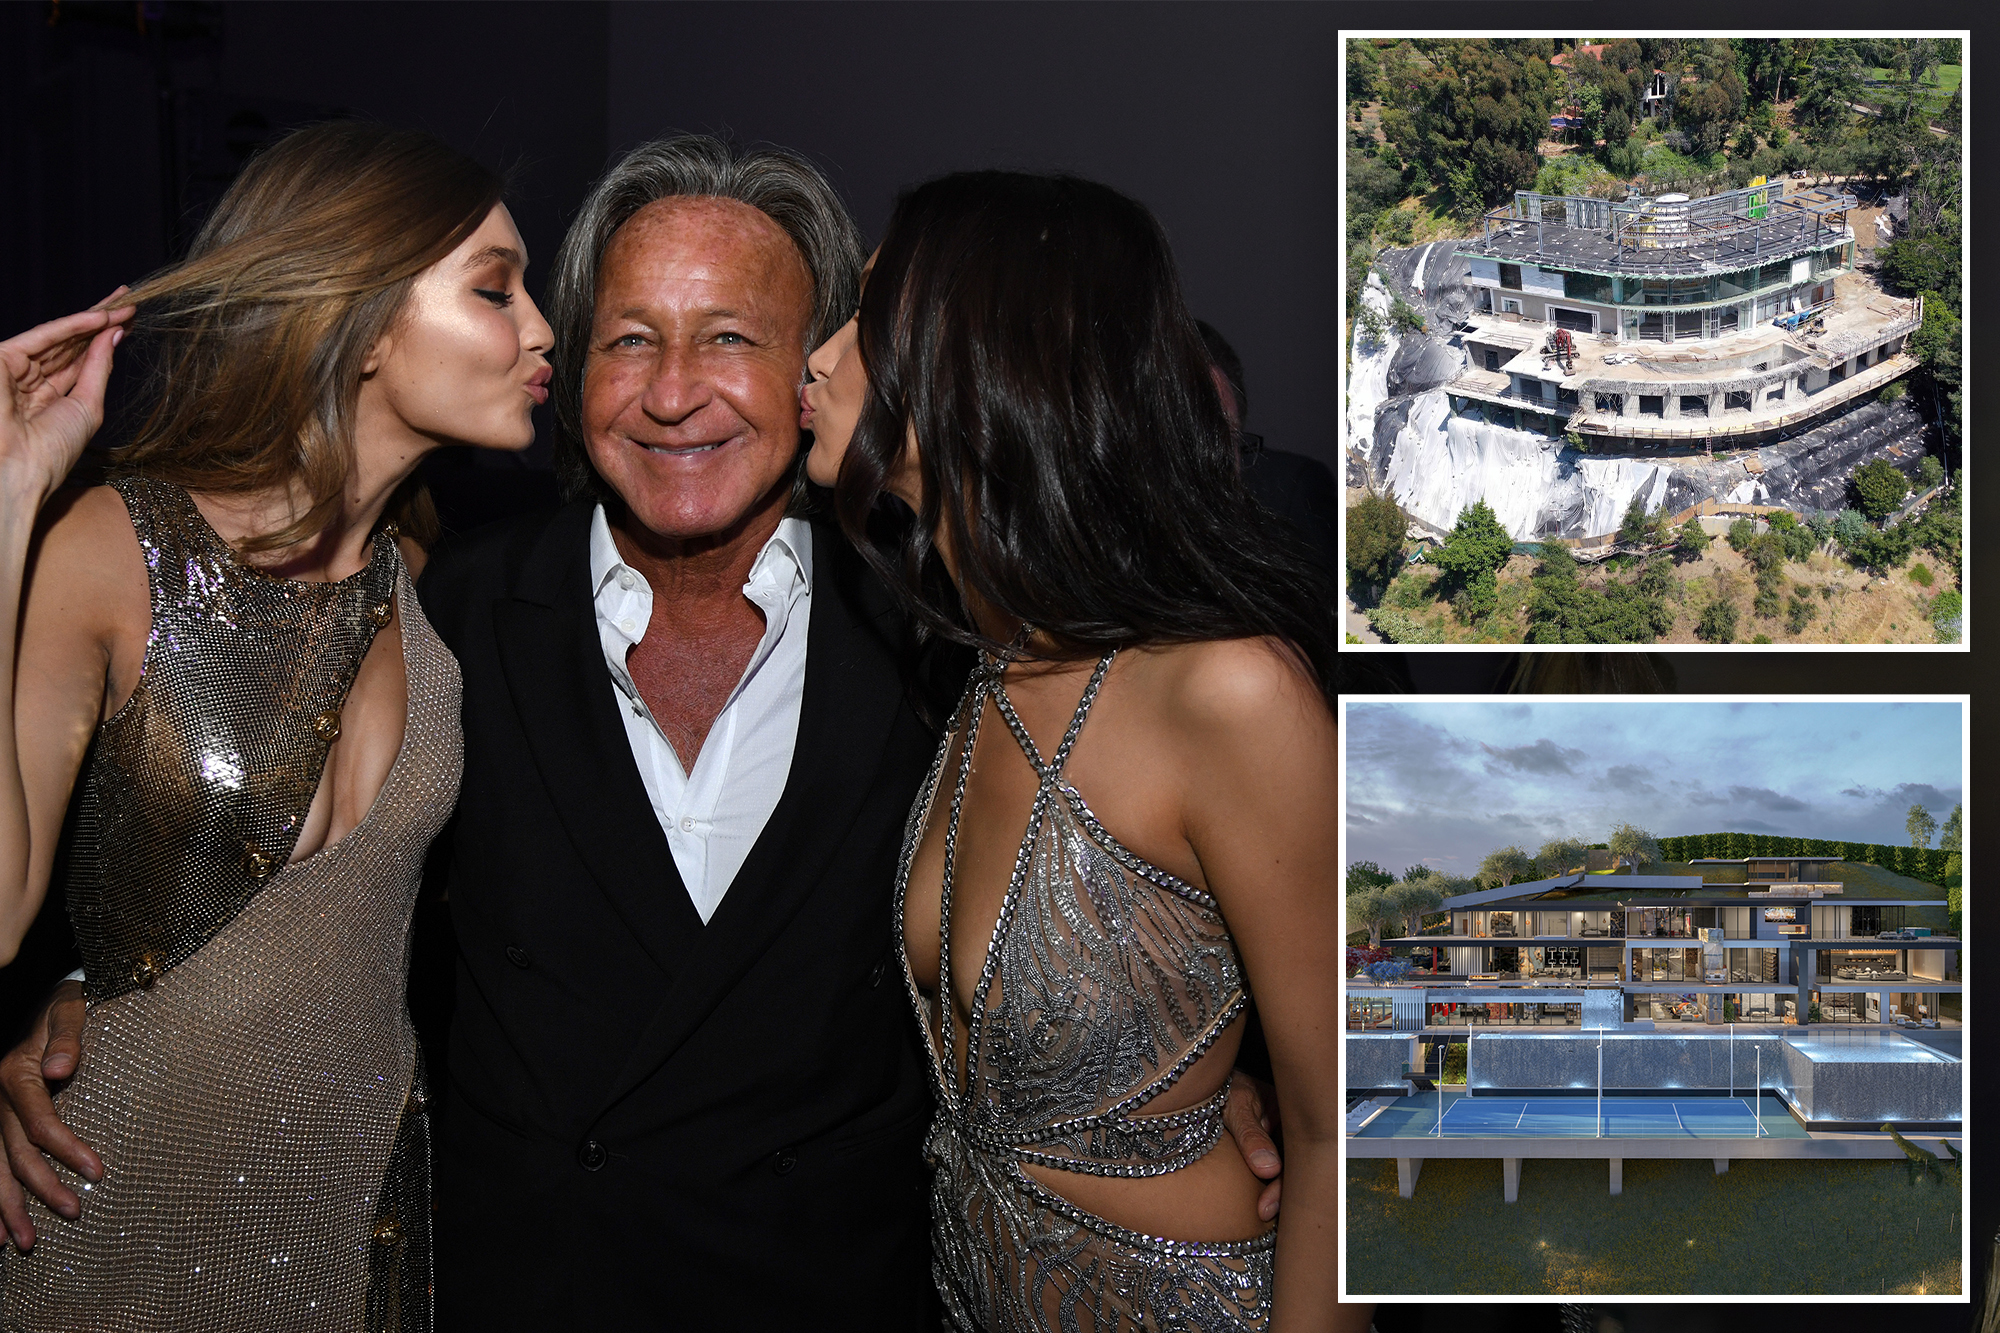 Mohamed Hadid — dad of supermodels Gigi and Bella — claims he's the 'victim' in bitter feud after filing 5th bankruptcy